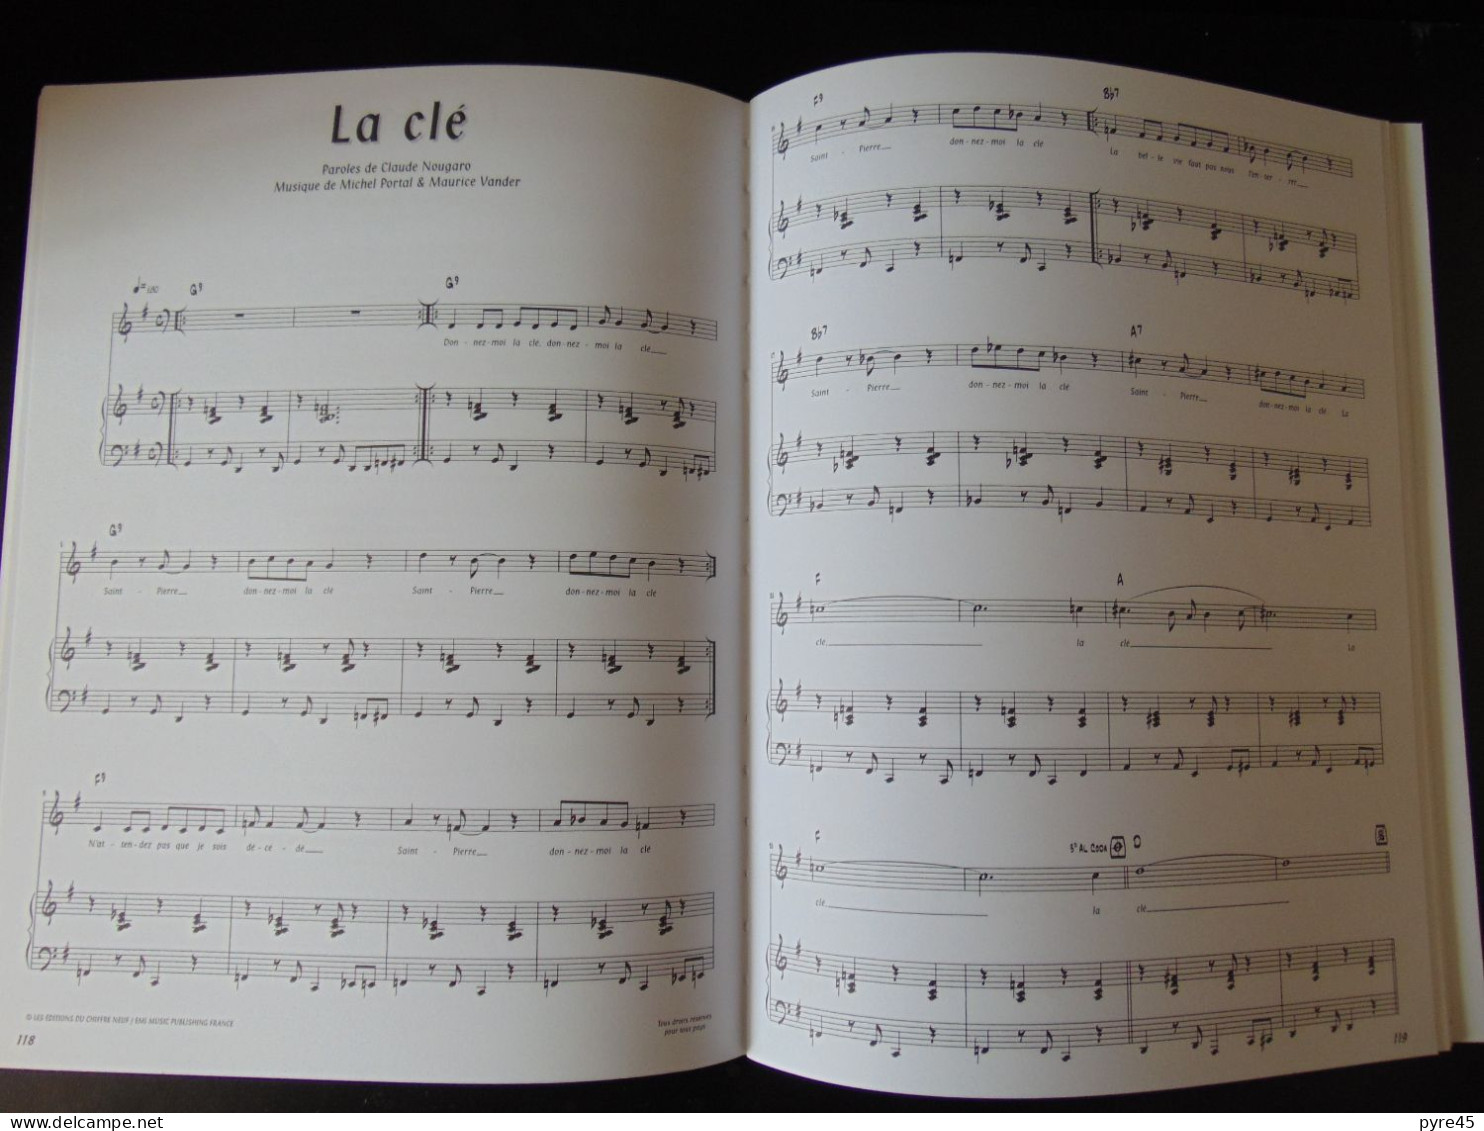 " Songbook Claude Nougaro " Hommage, Piano Chant, Editions Musicales Françaises, 244 Pages - Andere & Zonder Classificatie